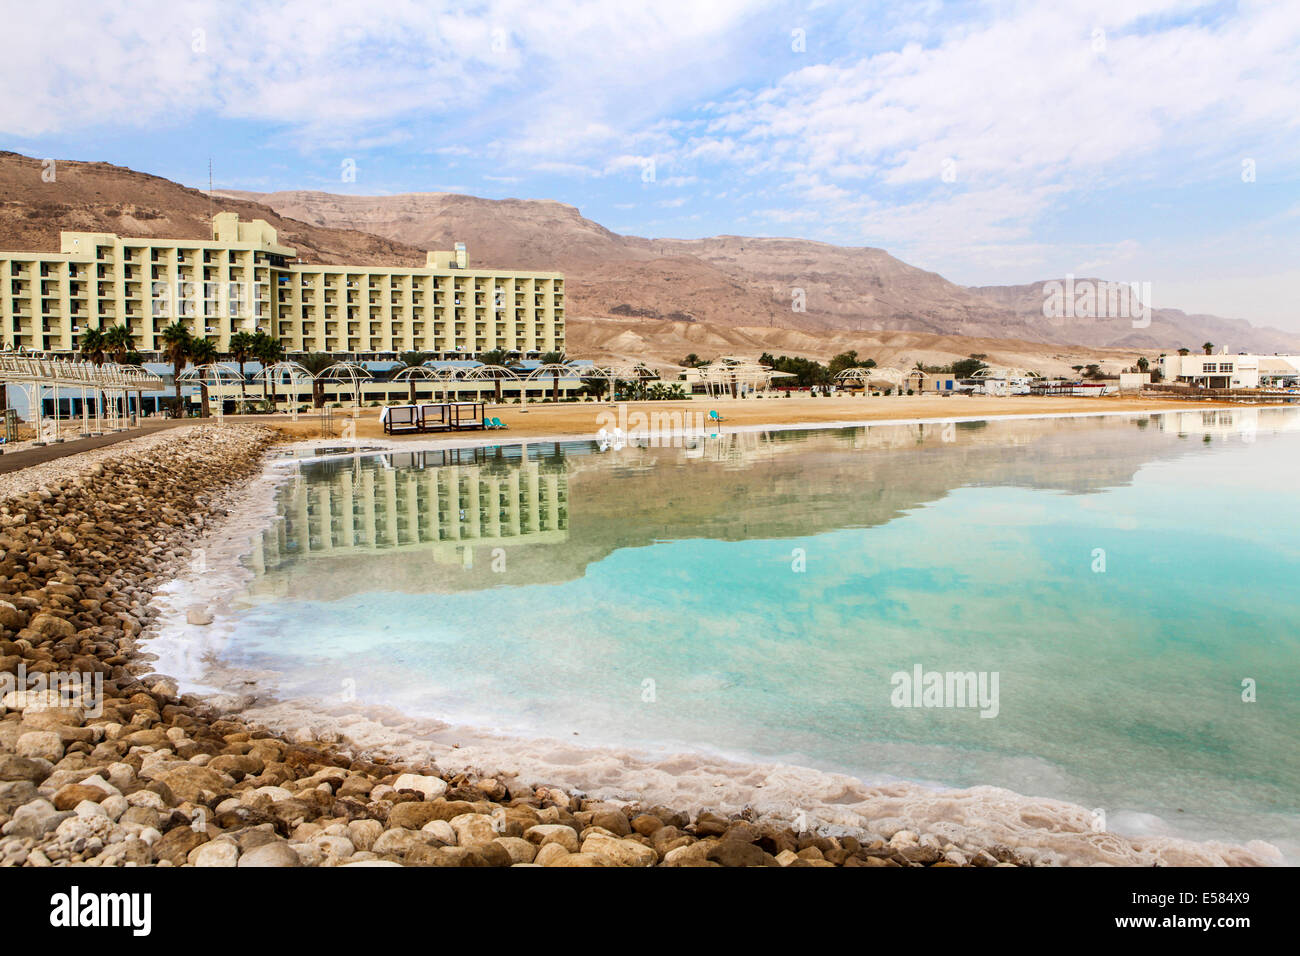 A tourist beach on the shore of the Dead Sea, Israel Stock Photo